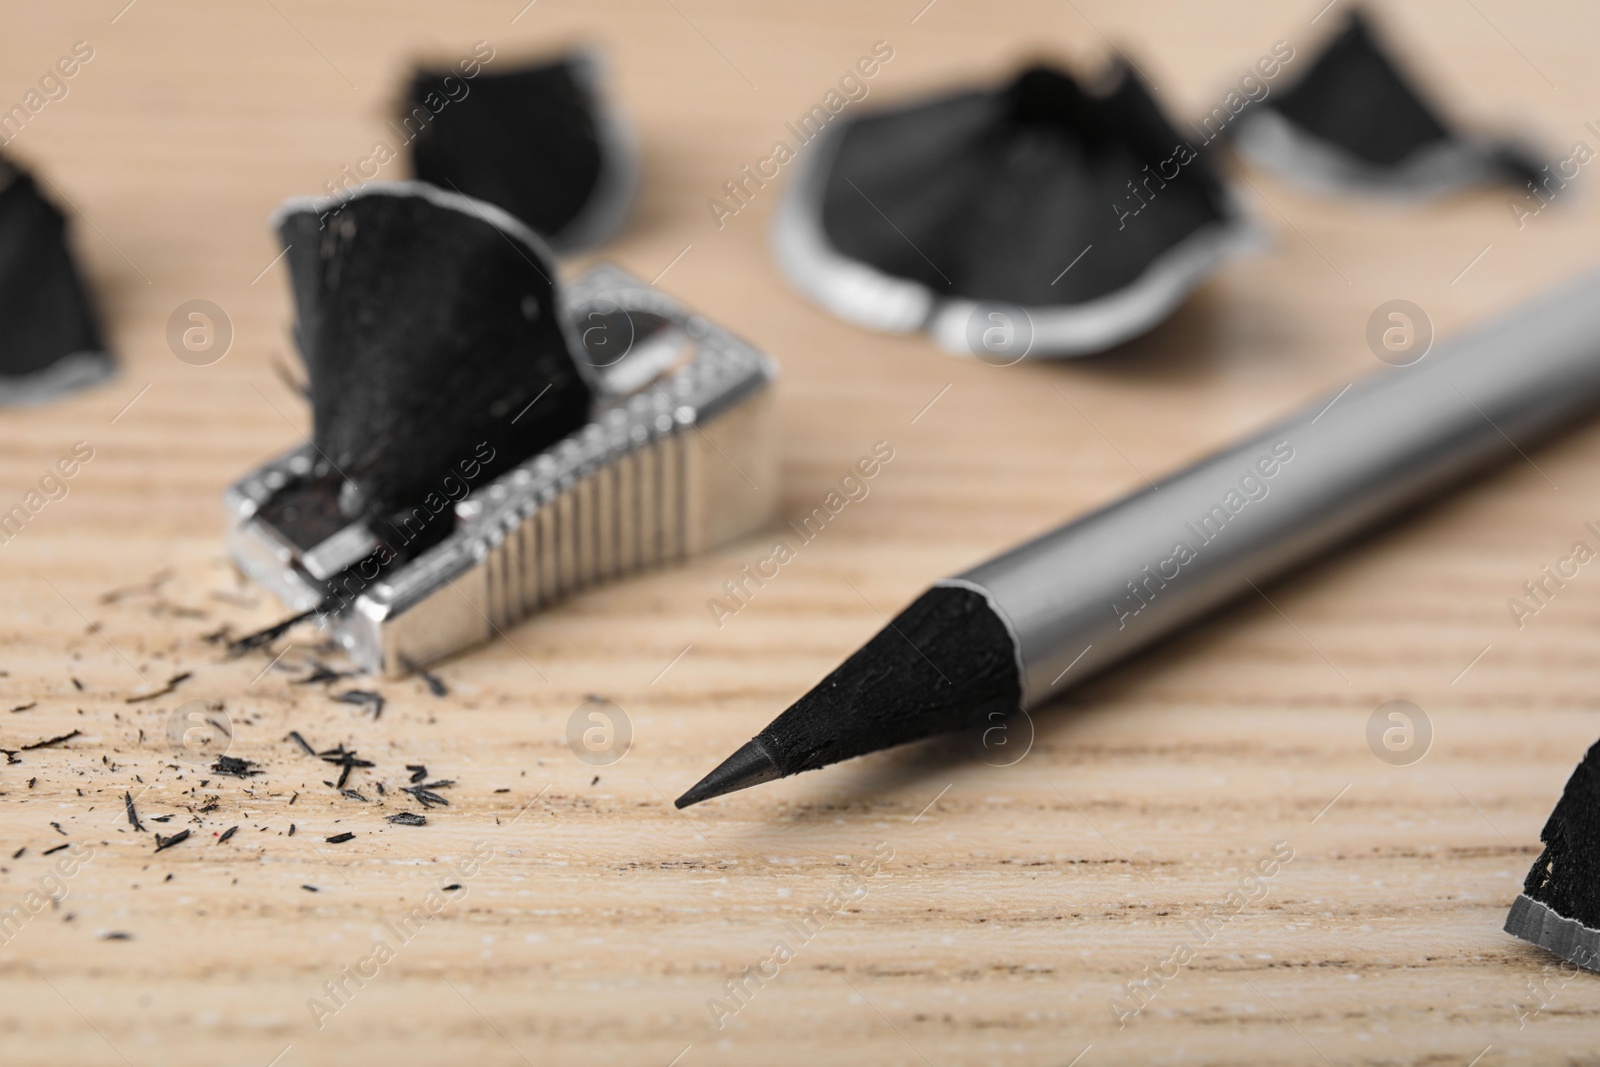 Photo of Pencil, sharpener and shavings on wooden table, closeup